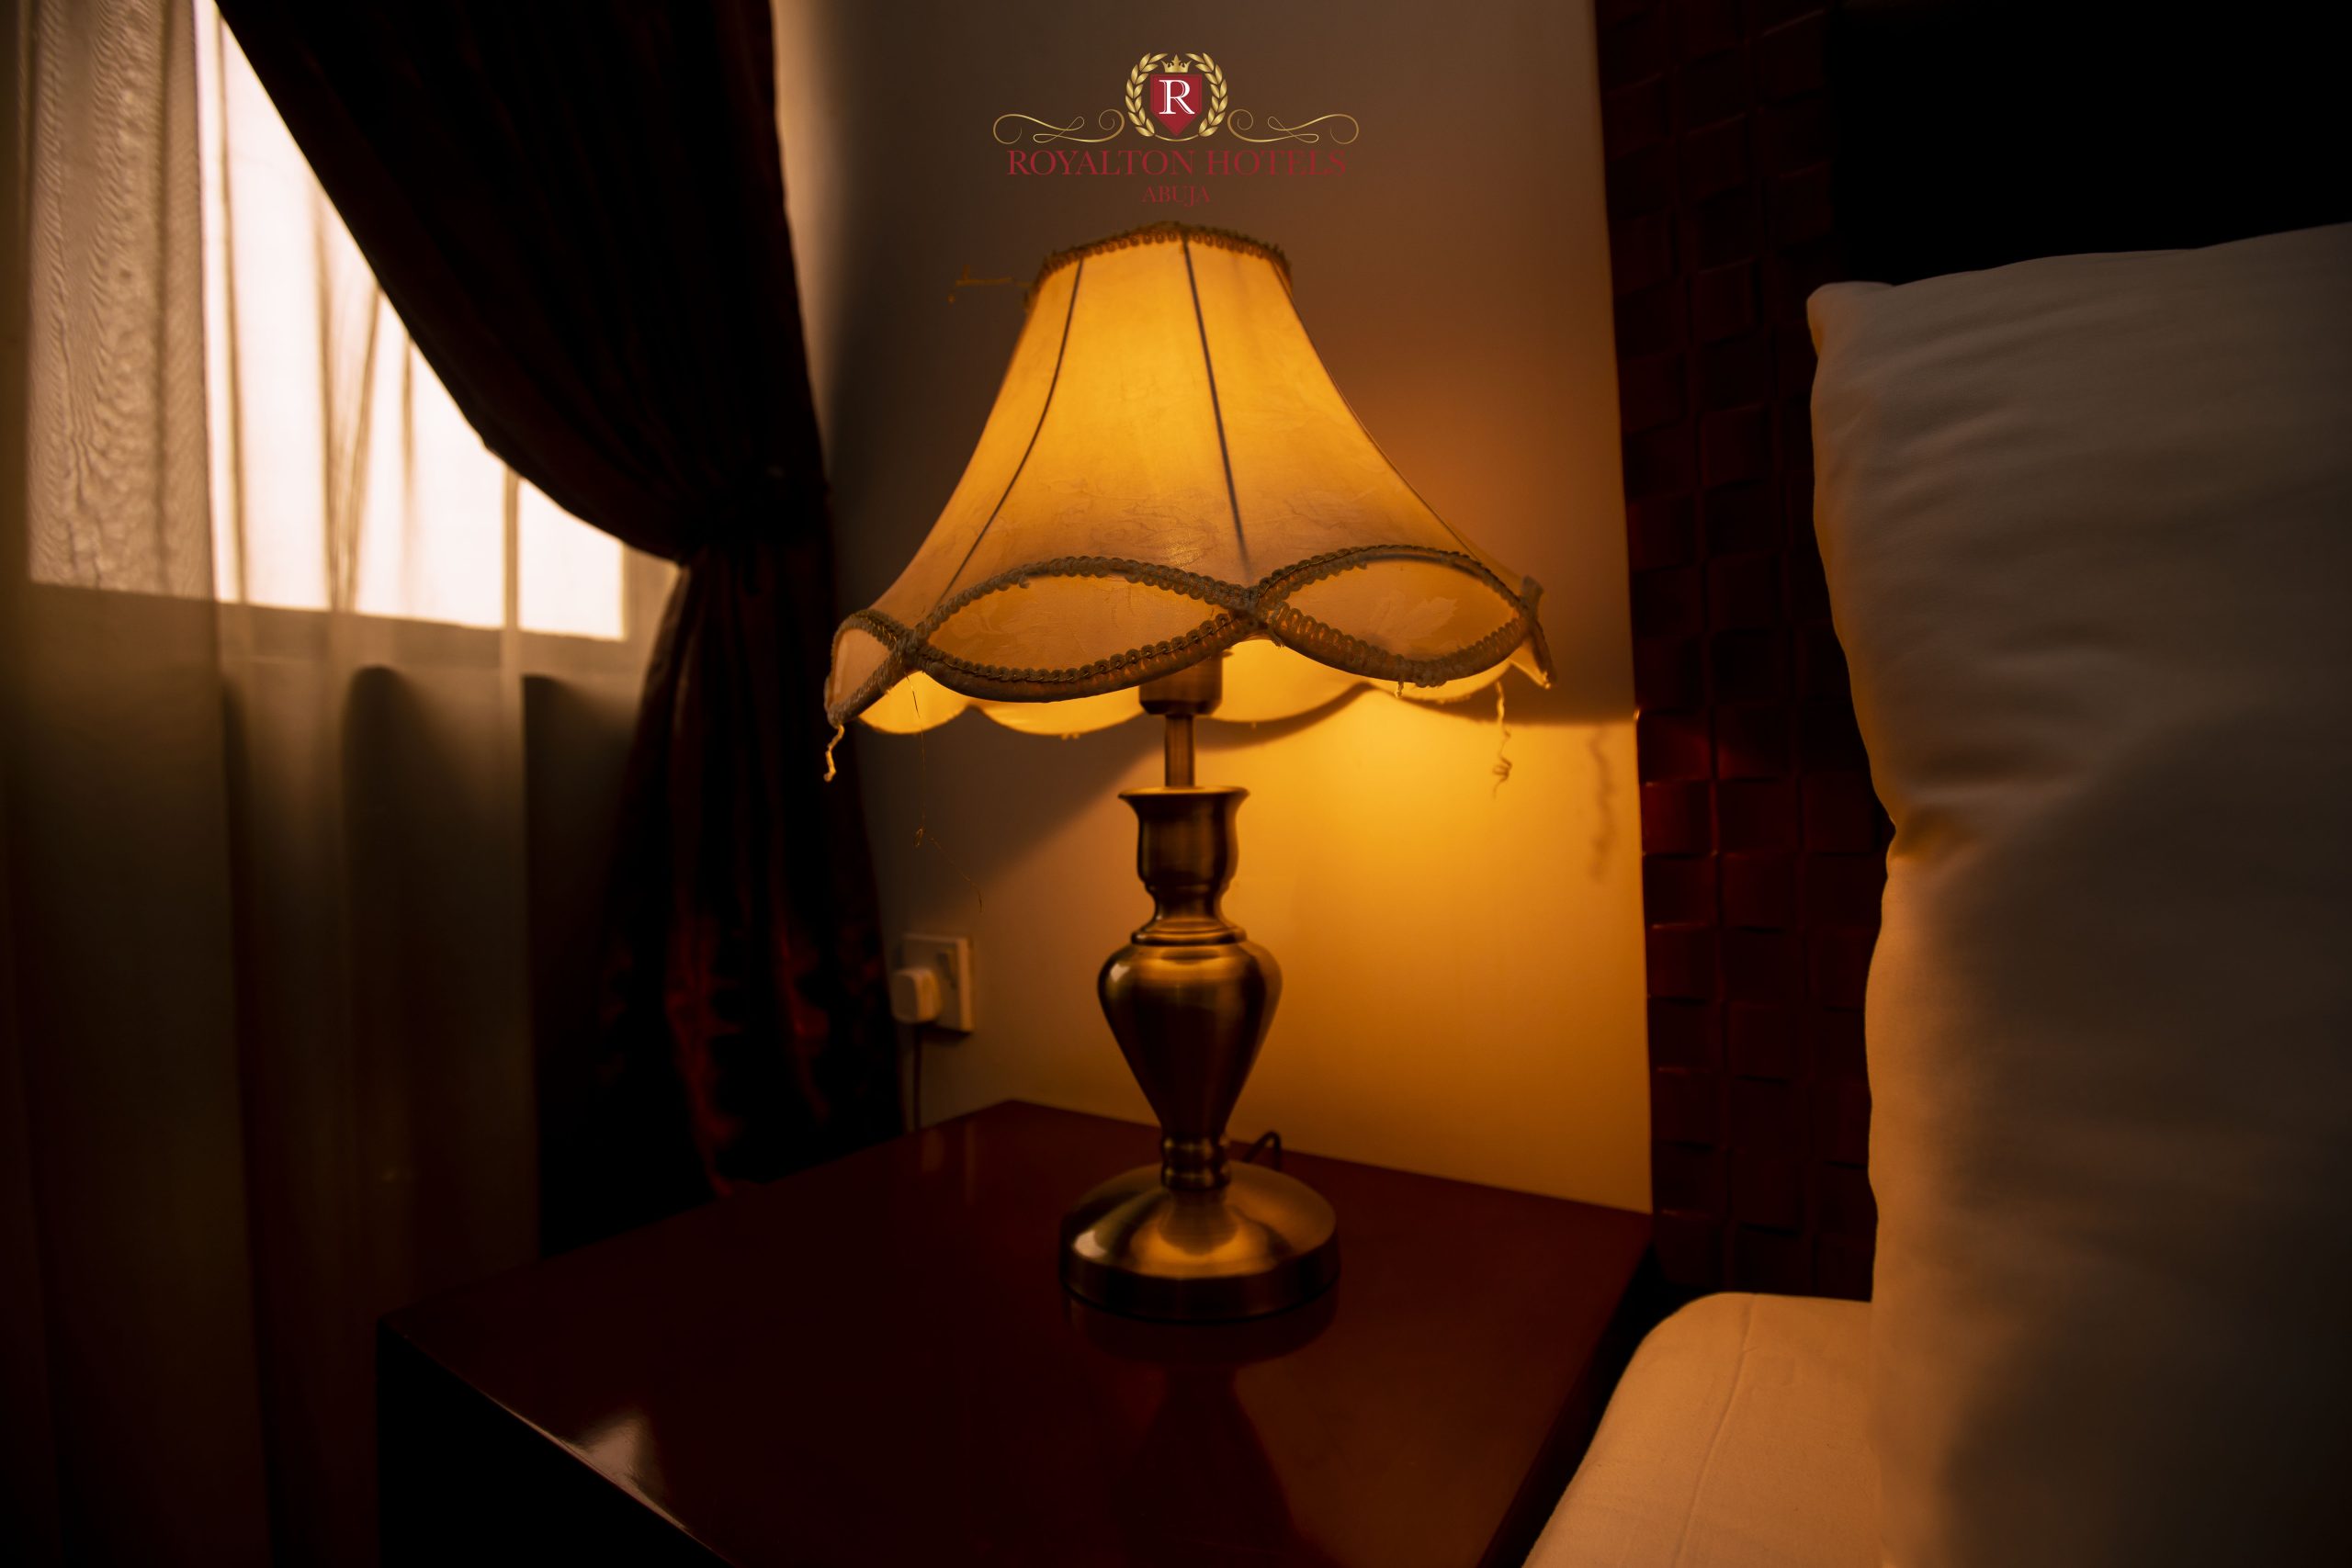 "A Bed Lamp Of Royalton Rooms"